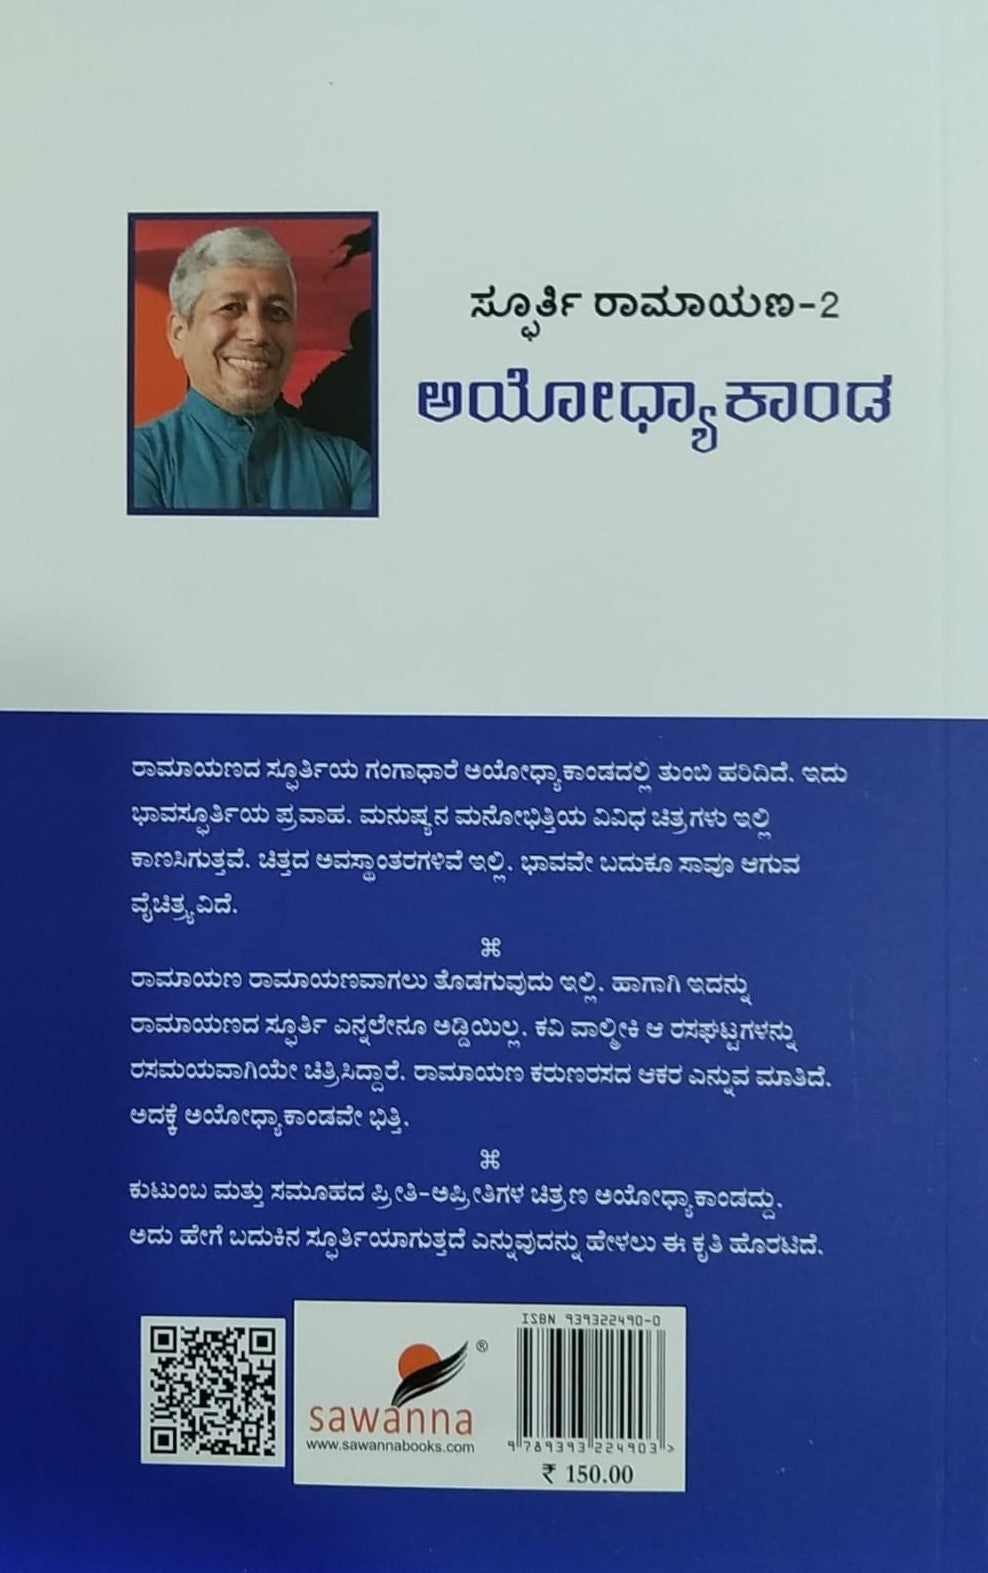 Title : Ayodhyakanda is a relious and Spiritual whic is Written by Jagadeesha Sharma Sapma and Published by Sawanna Enterprised